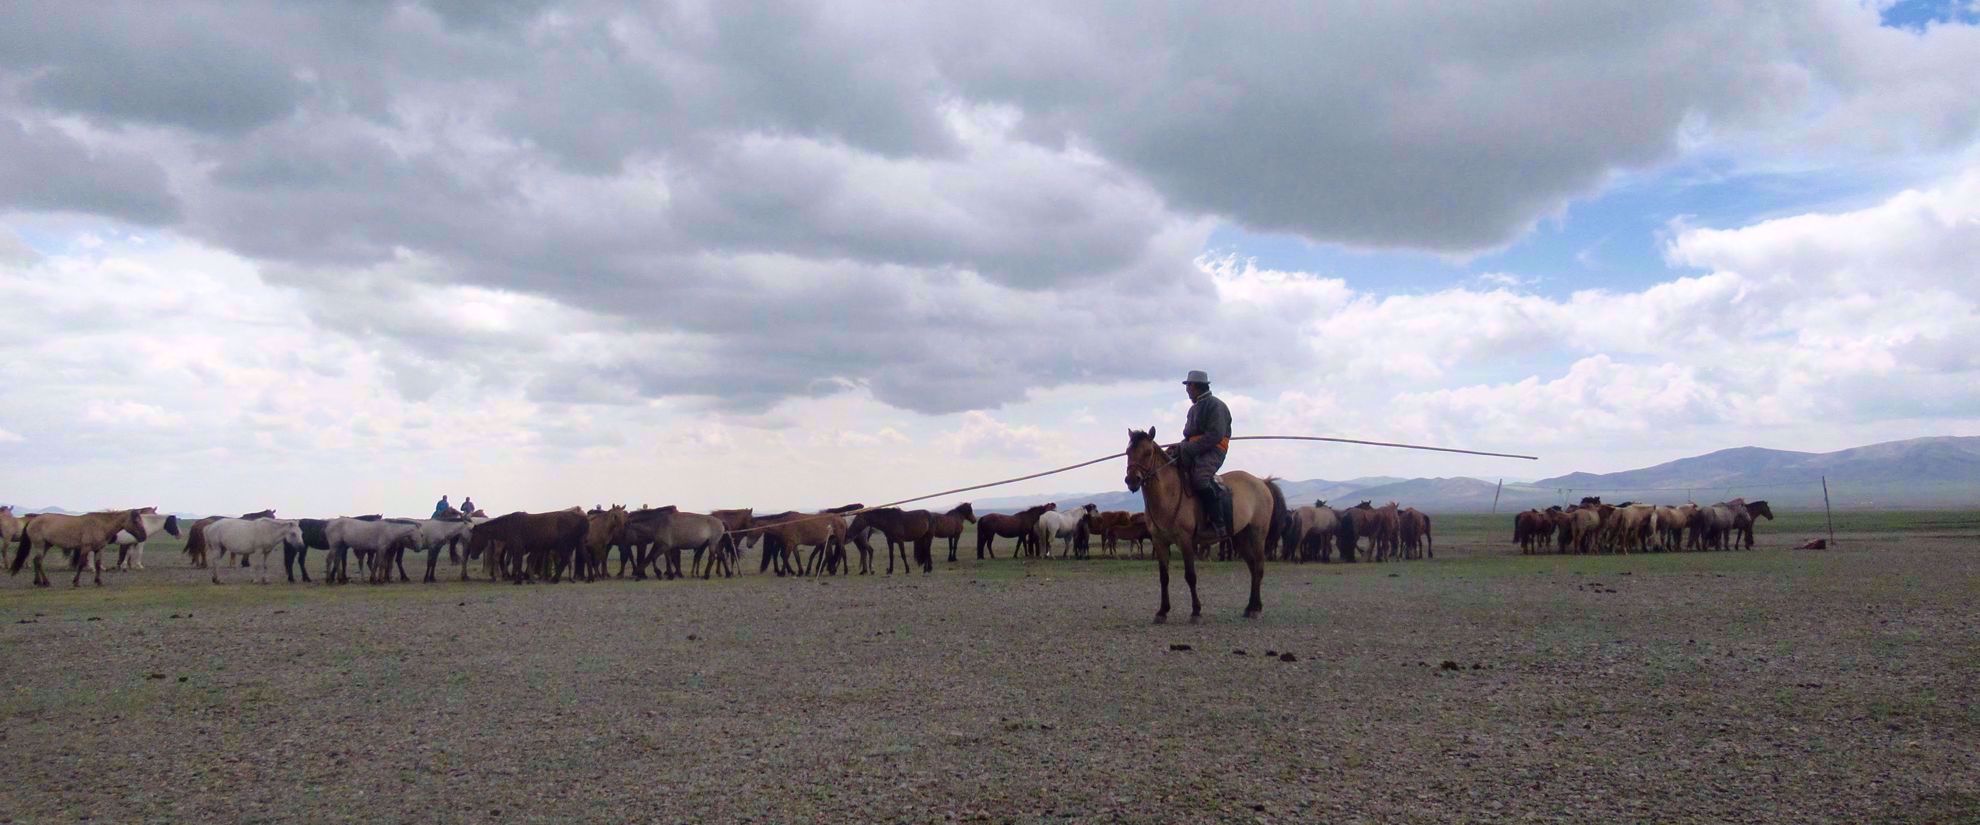 man with herd of horses mongolia